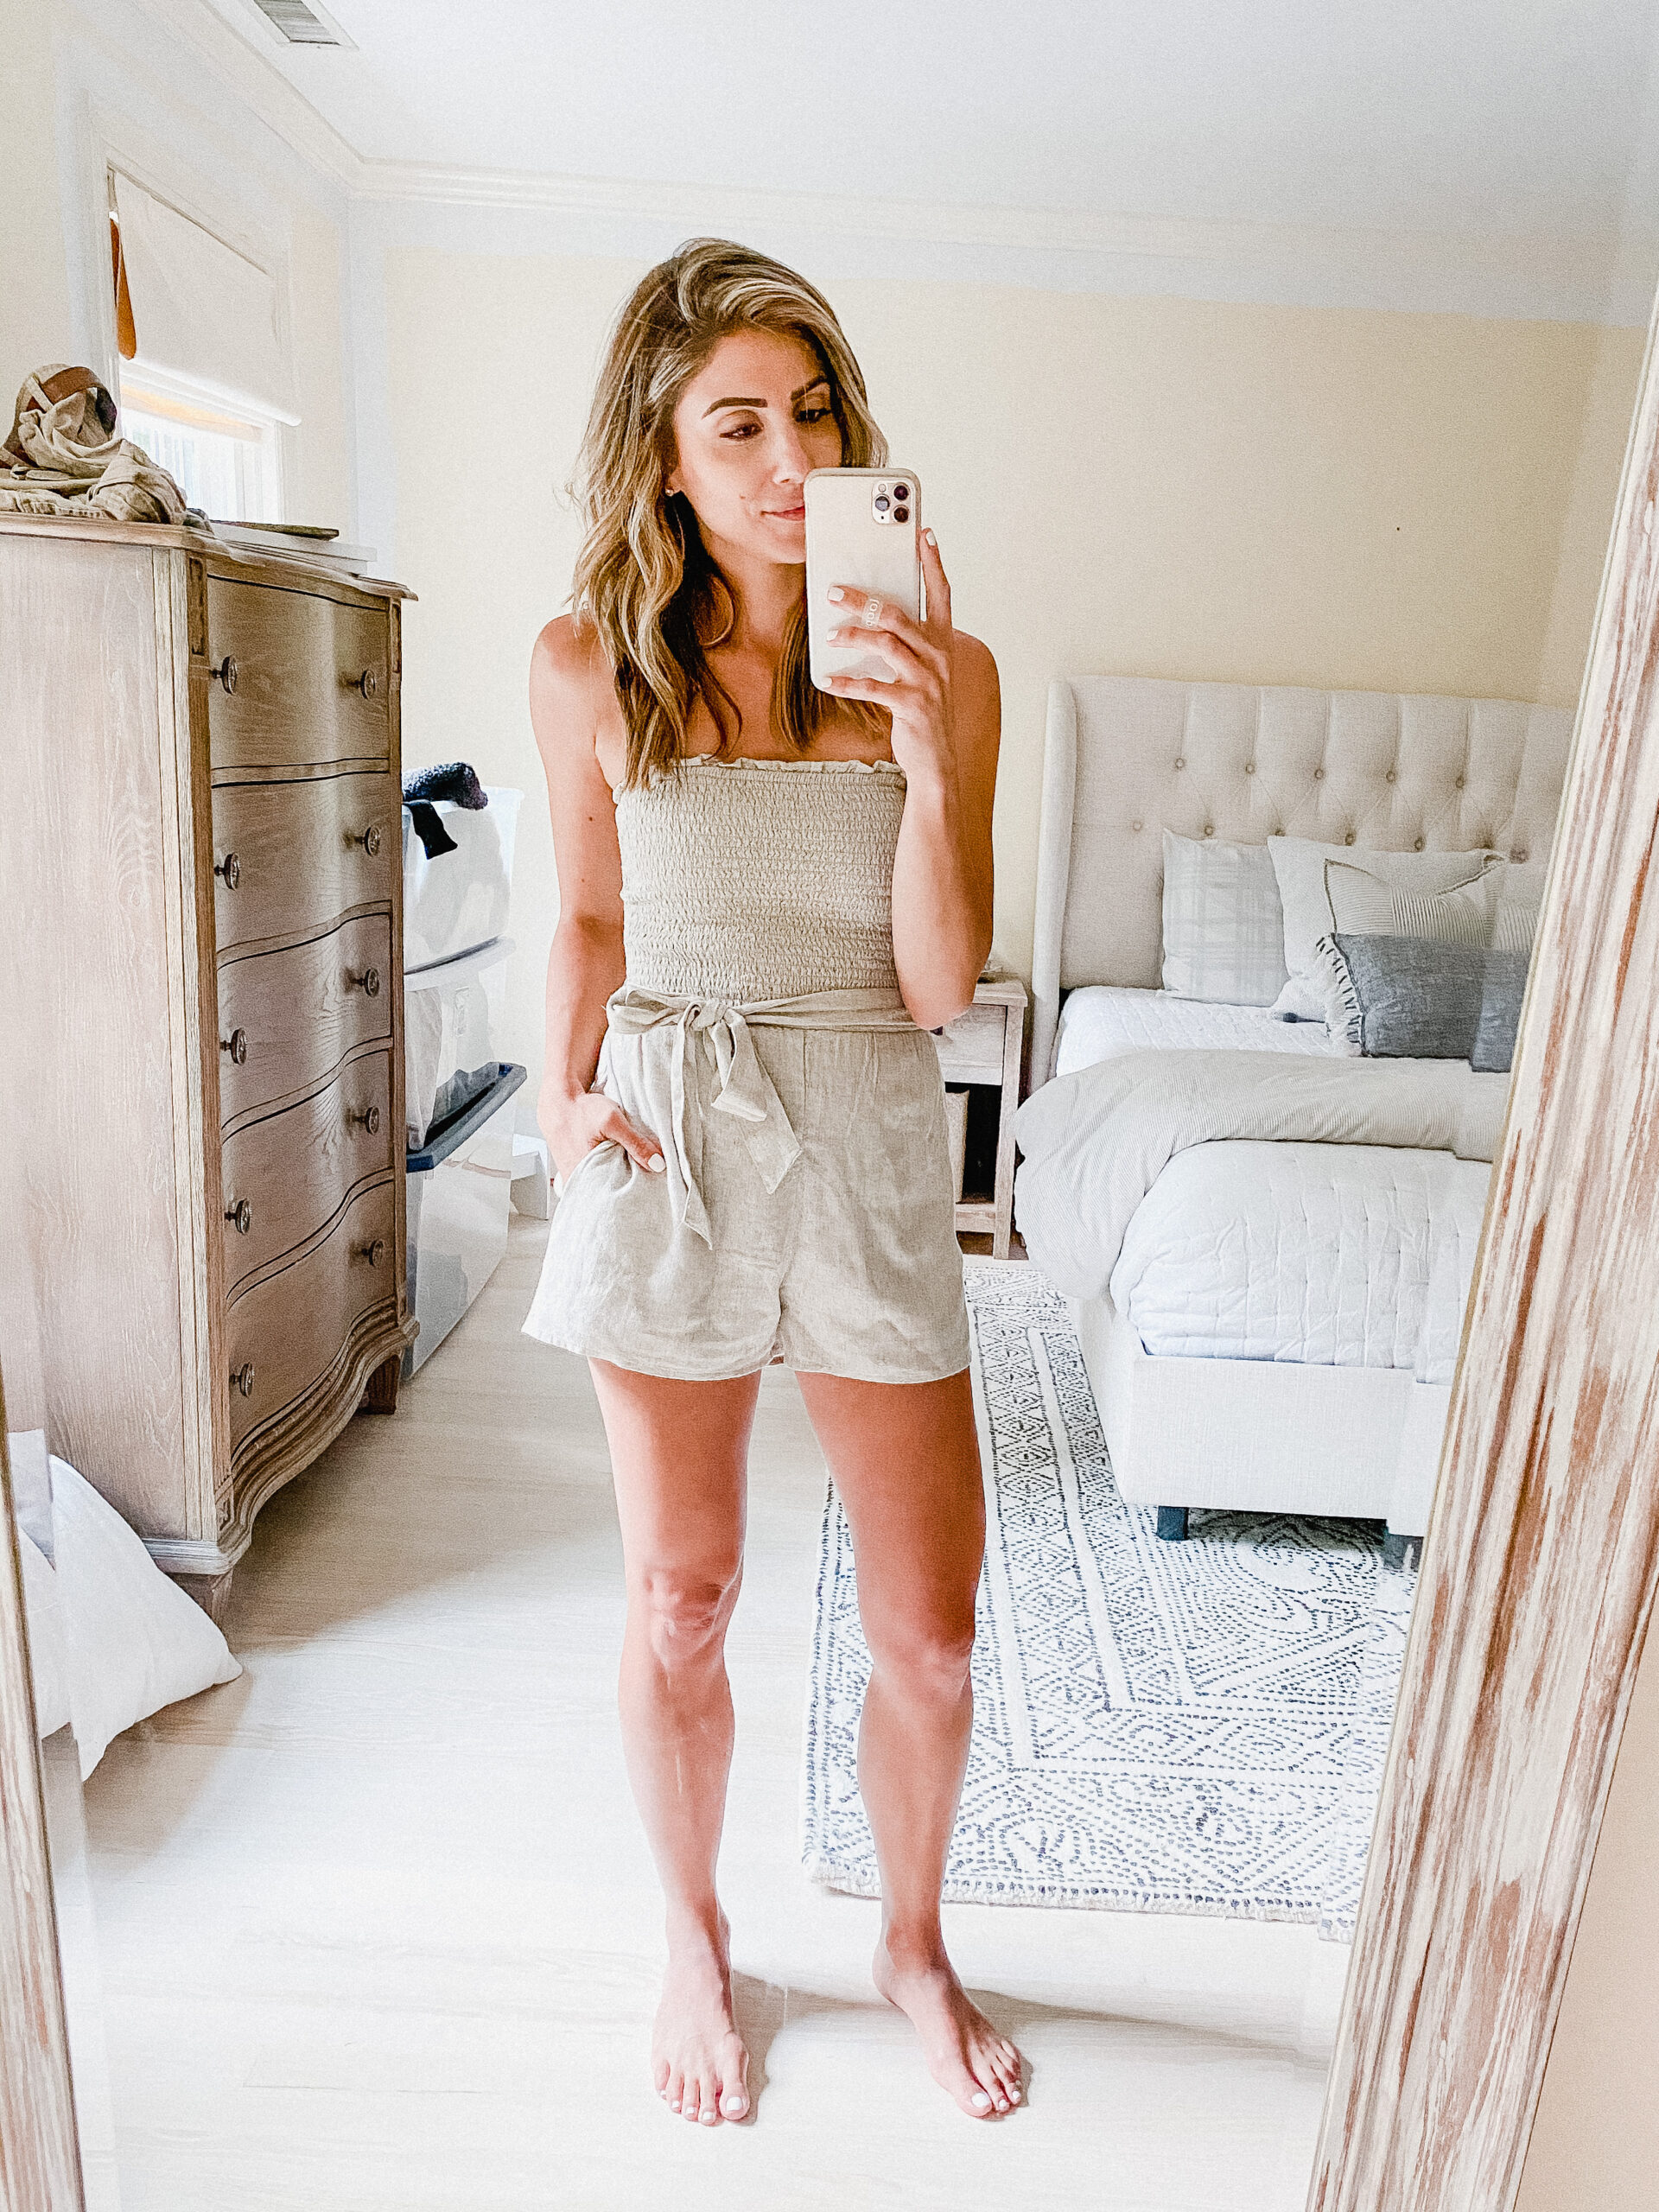 Connecticut life and style blogger Lauren McBride shares a mini Abercrombie & Fitch try on featuring a variety of summer options.